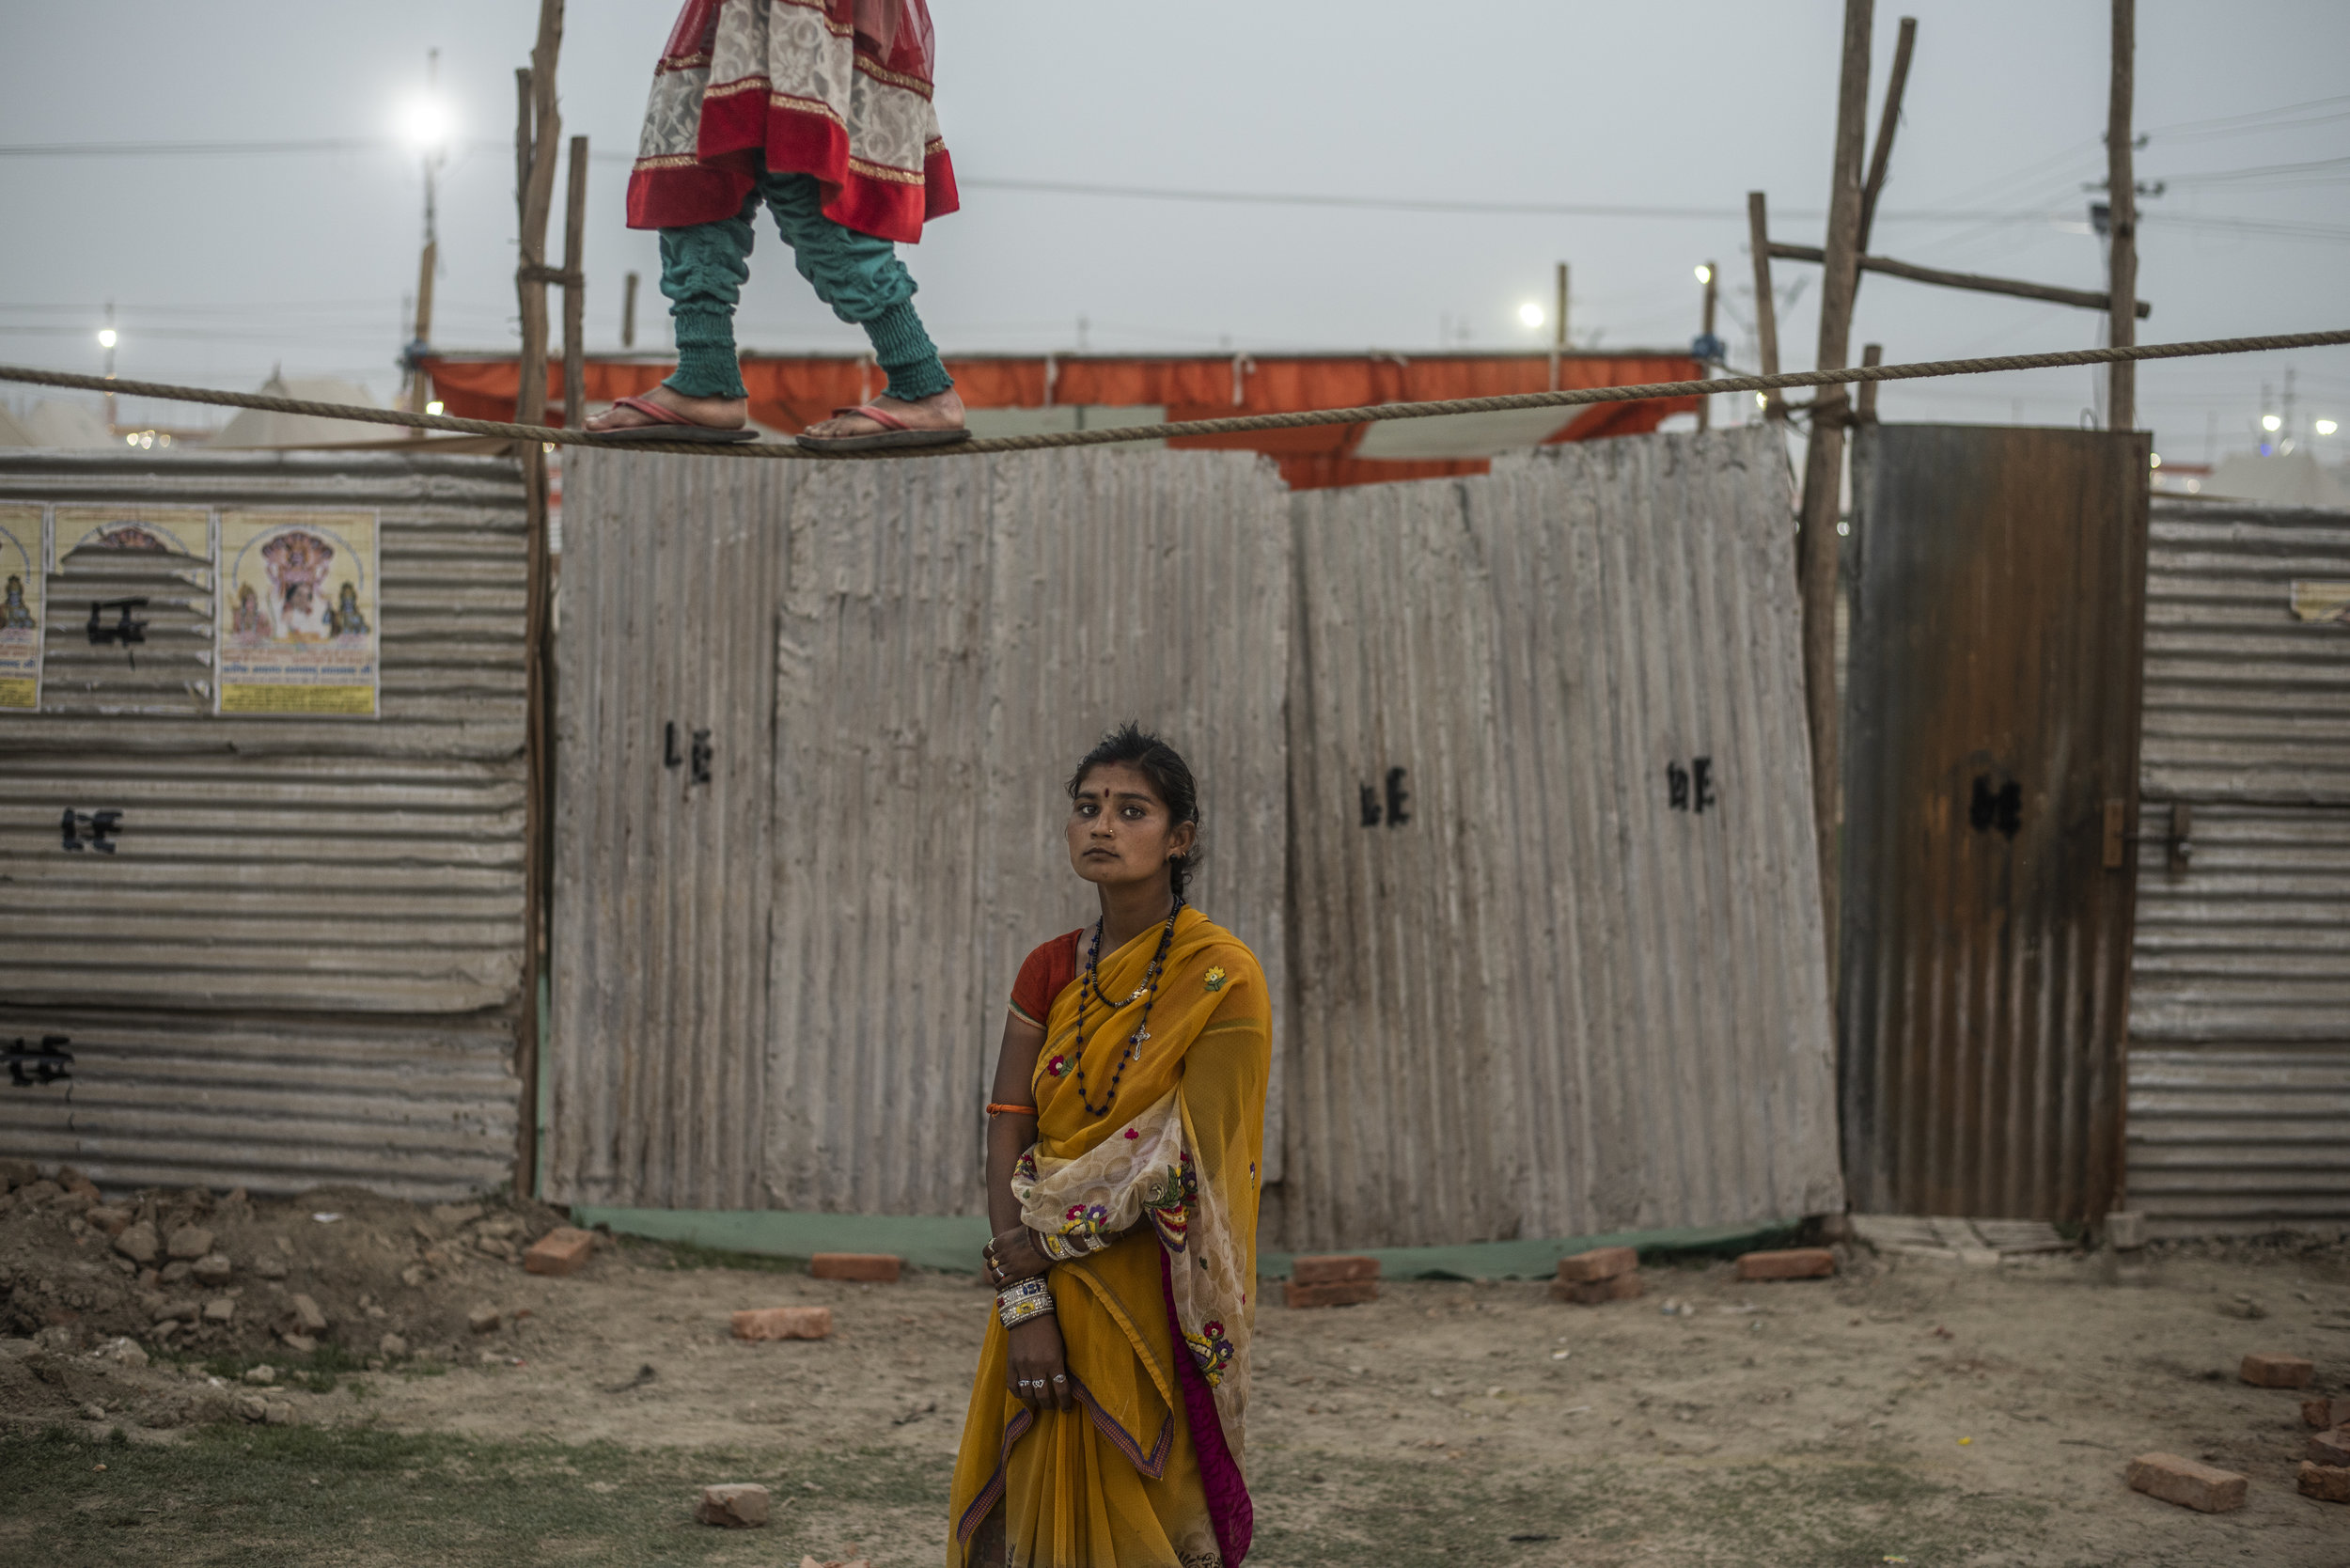  A young girl balances on a tight rope while another stands stoically below to collect money from bystanders. 